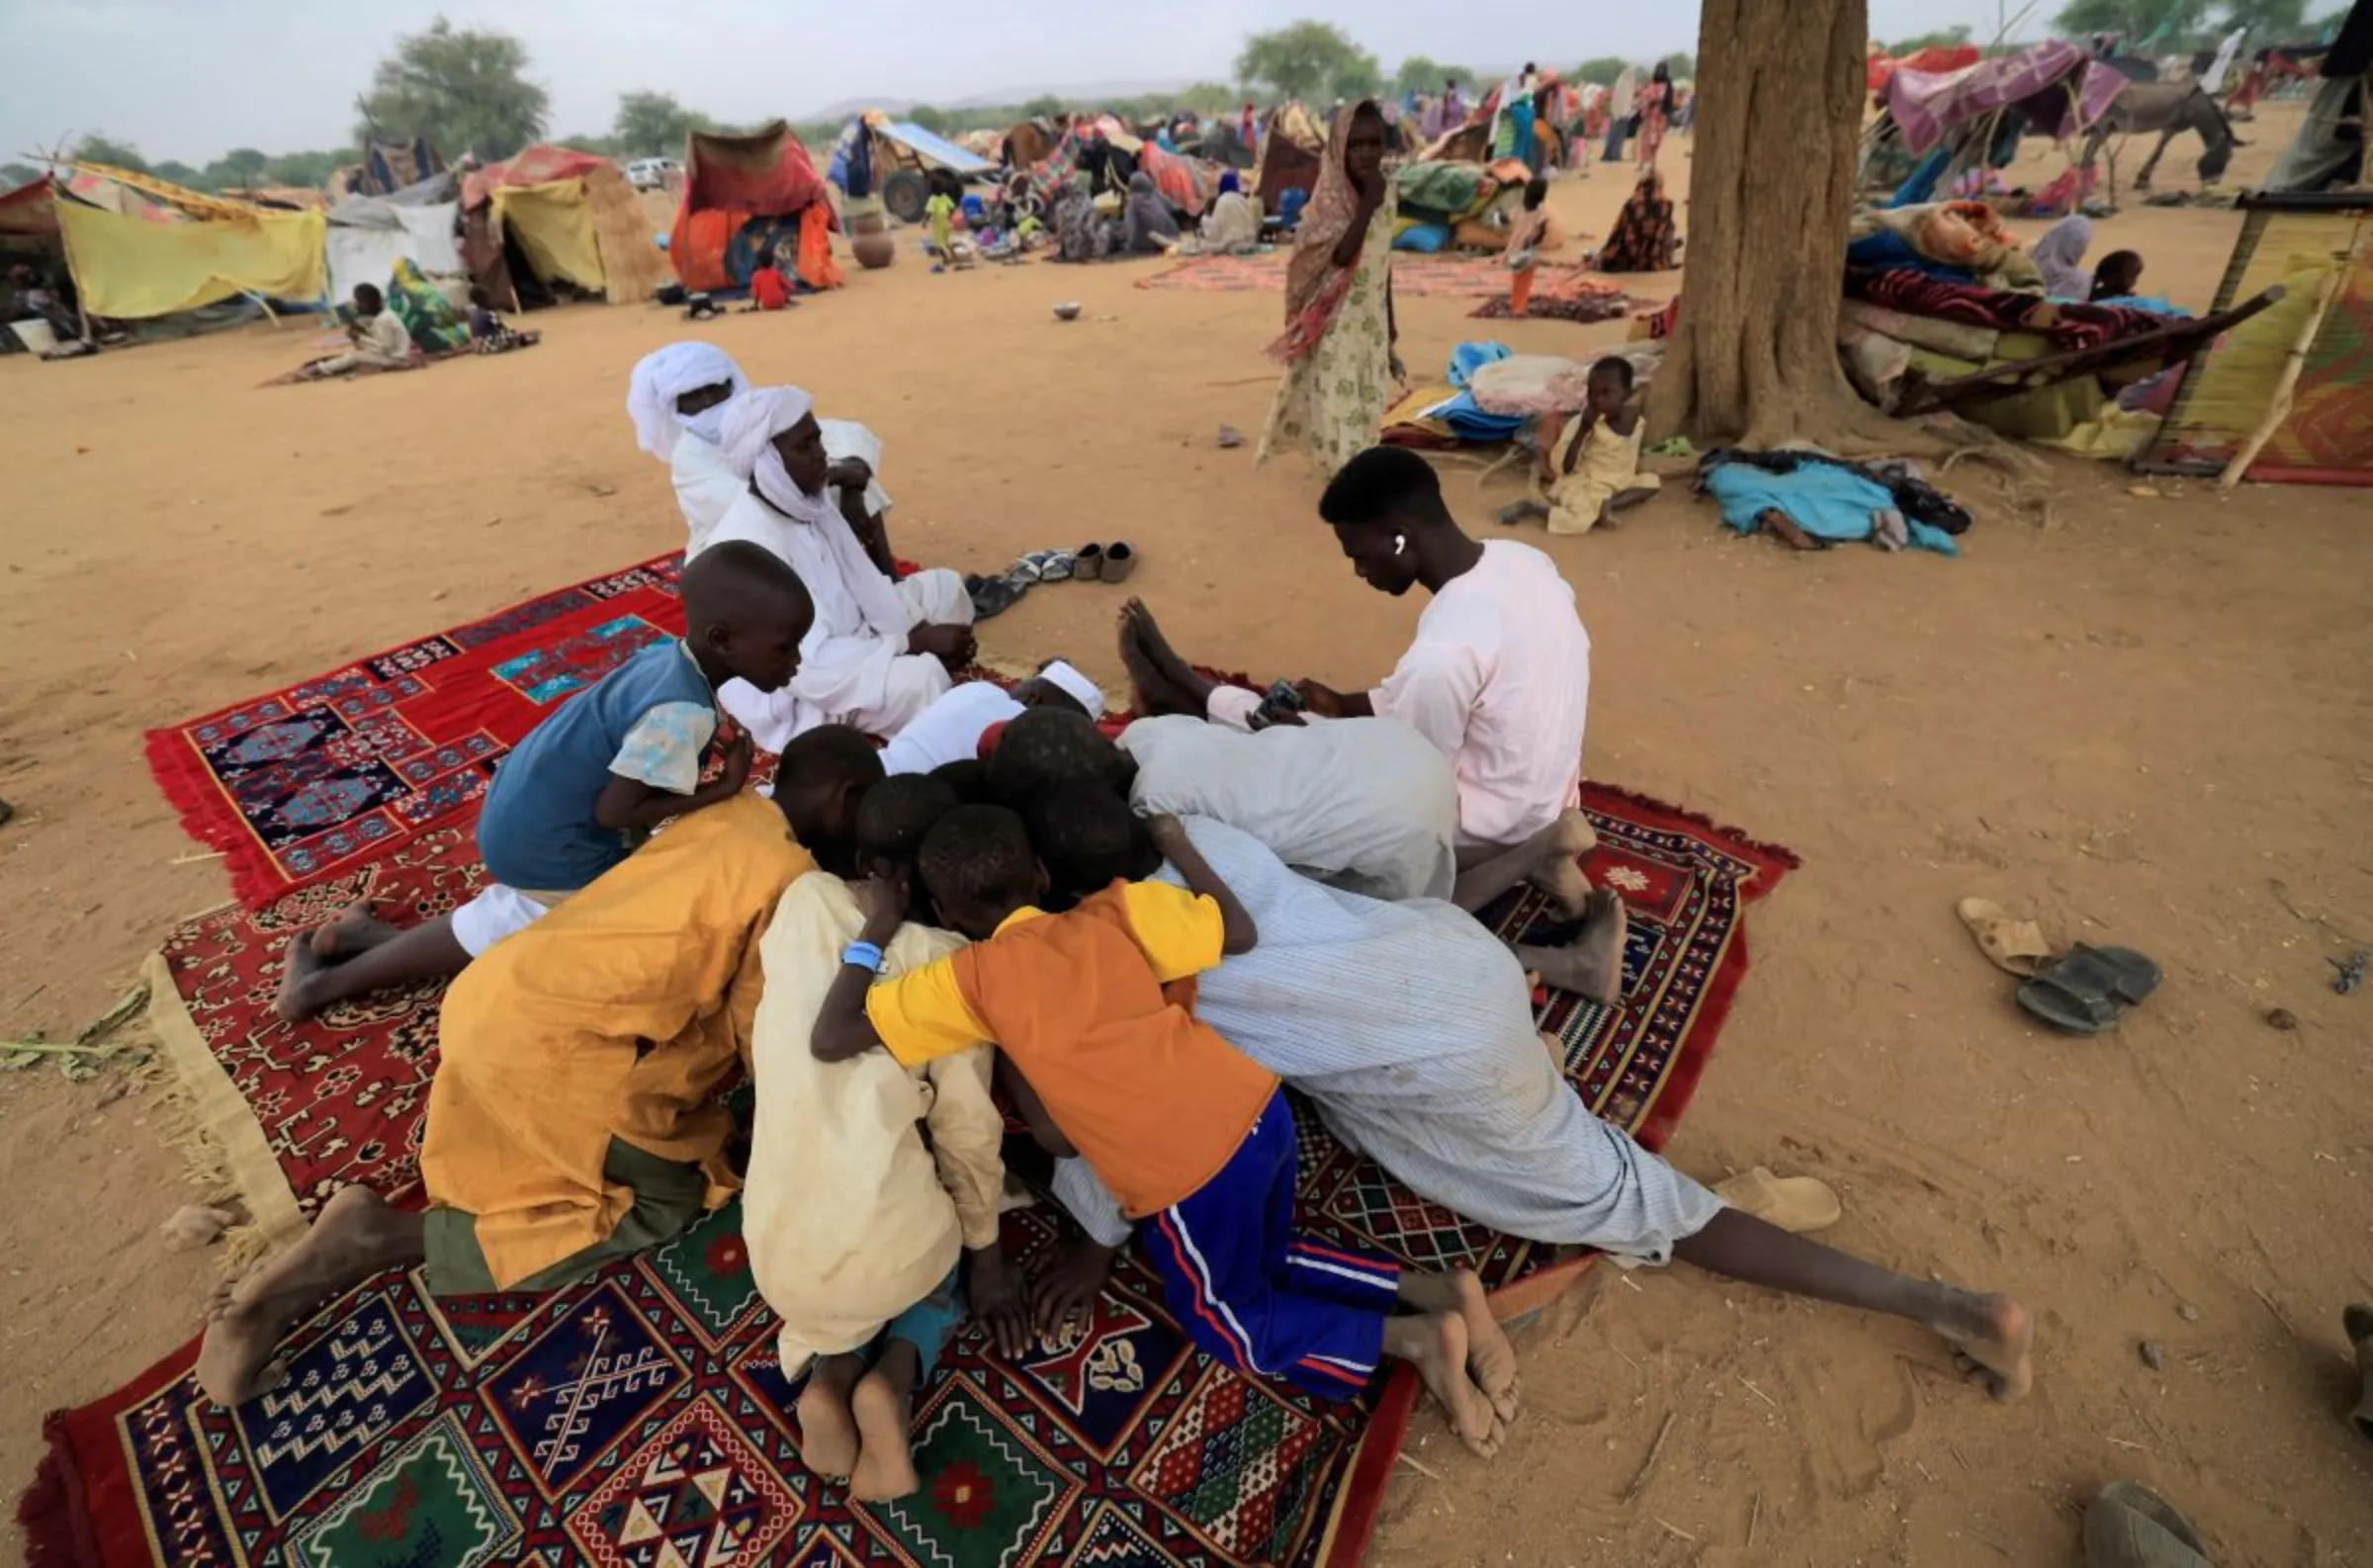 Sudanese refugee children who have fled the violence in Sudan's Darfur region, play a game on a mobile phone beside makeshift shelters, near the border between Sudan and Chad in Koufroun, Chad May 11, 2023